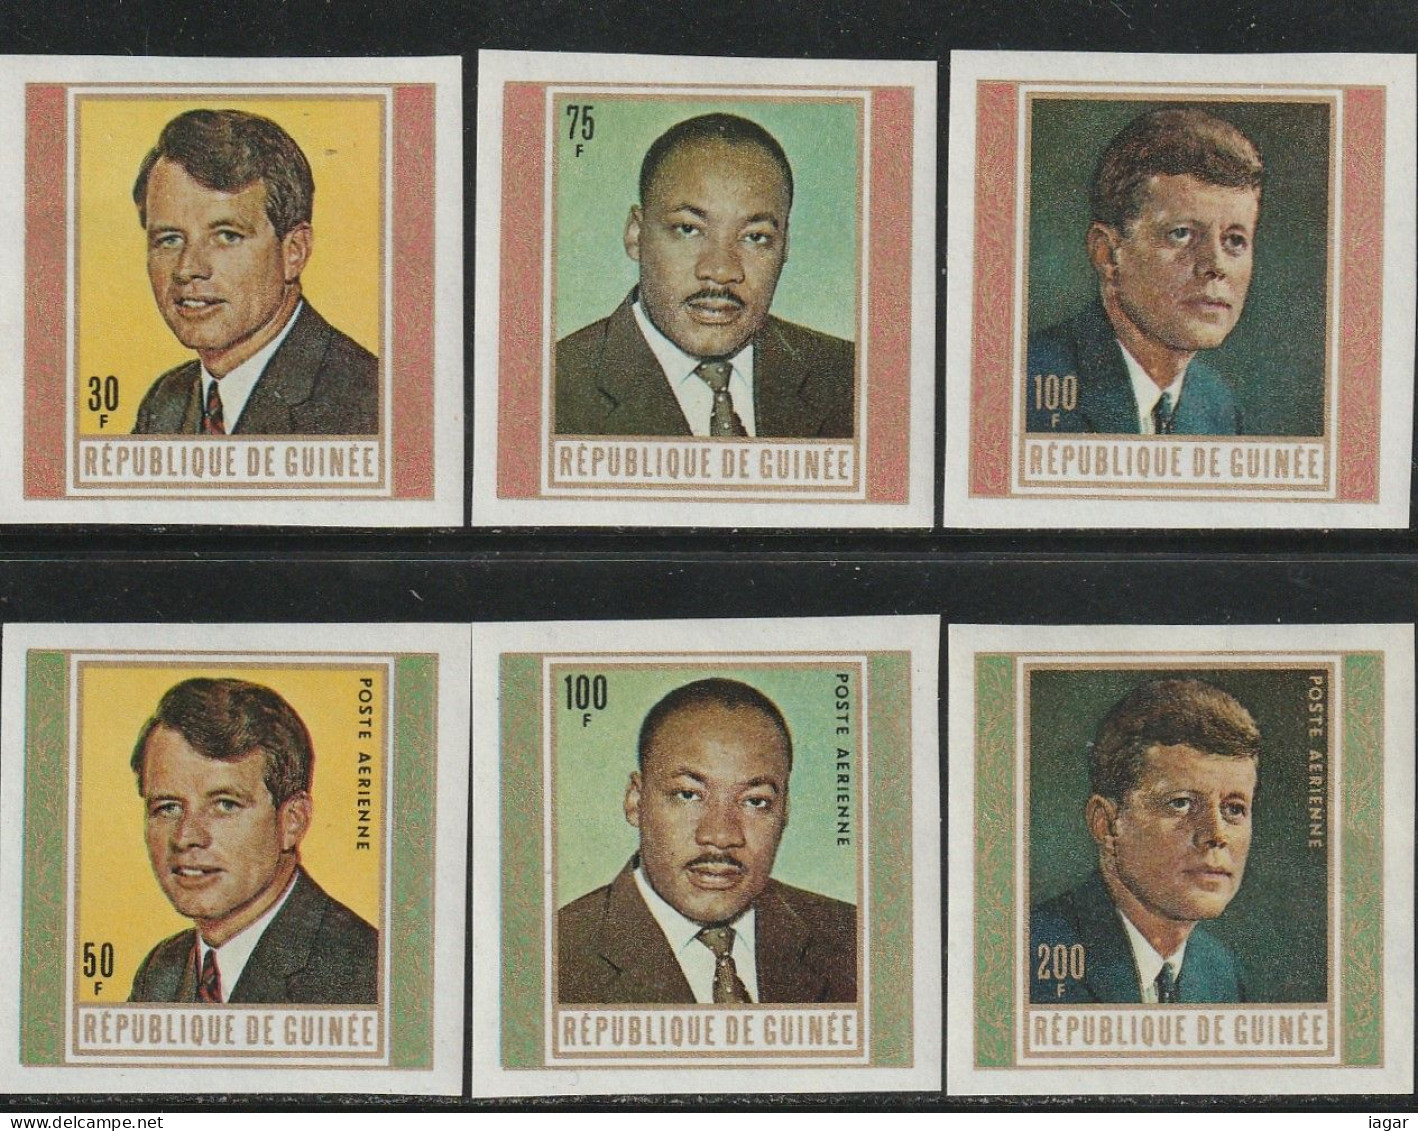 THEMATIC  FAMOUS PEOPLE: MARTIN LUTHER KING, JOHN AND ROBERT KENNEDY  (IMPERFORATED) - GUINEE - Martin Luther King